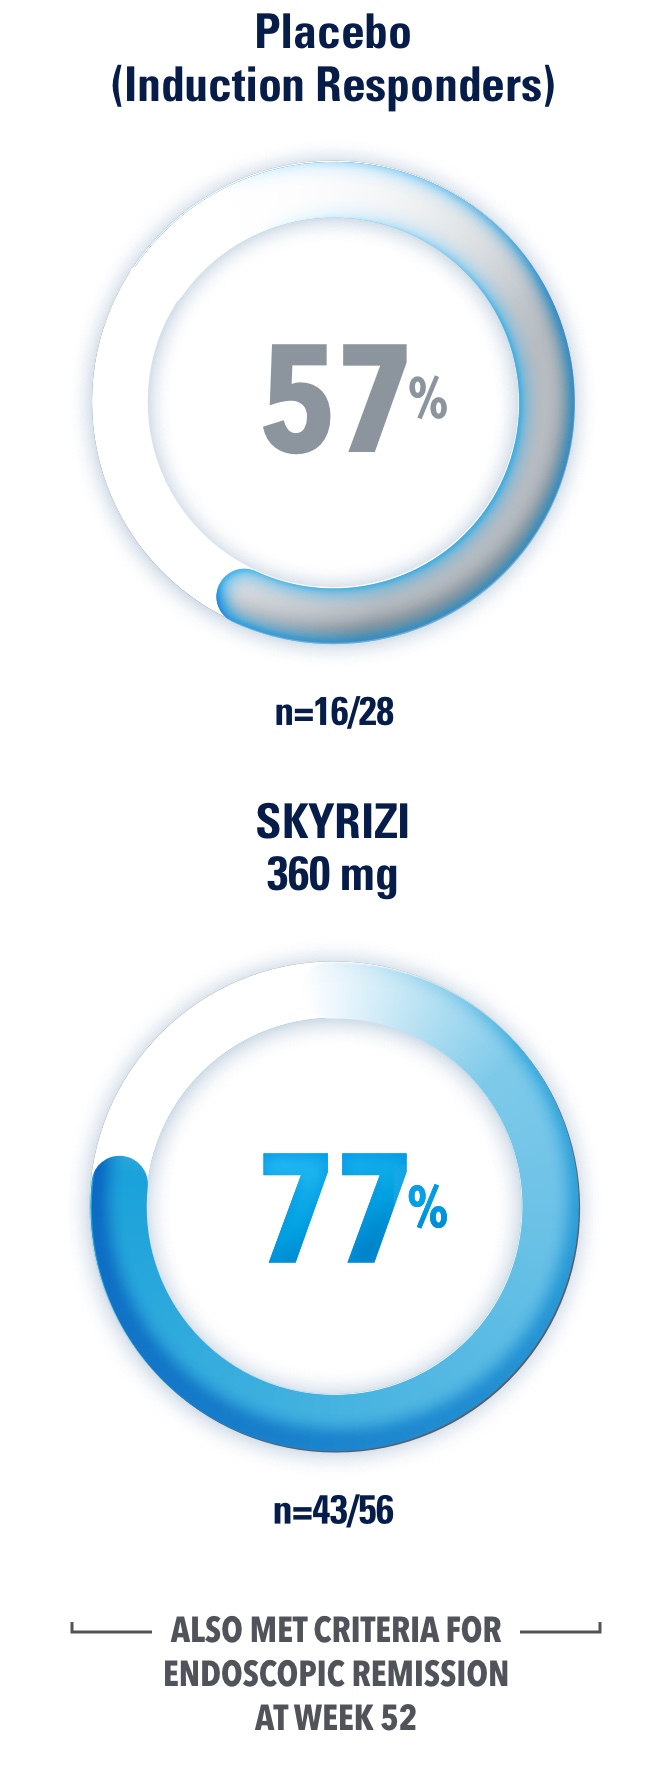 Maintenance of clinical remission at Week 52: 77% in SKYRIZI 360mg (n=43/56) vs 57% in placebo (n=16/28)